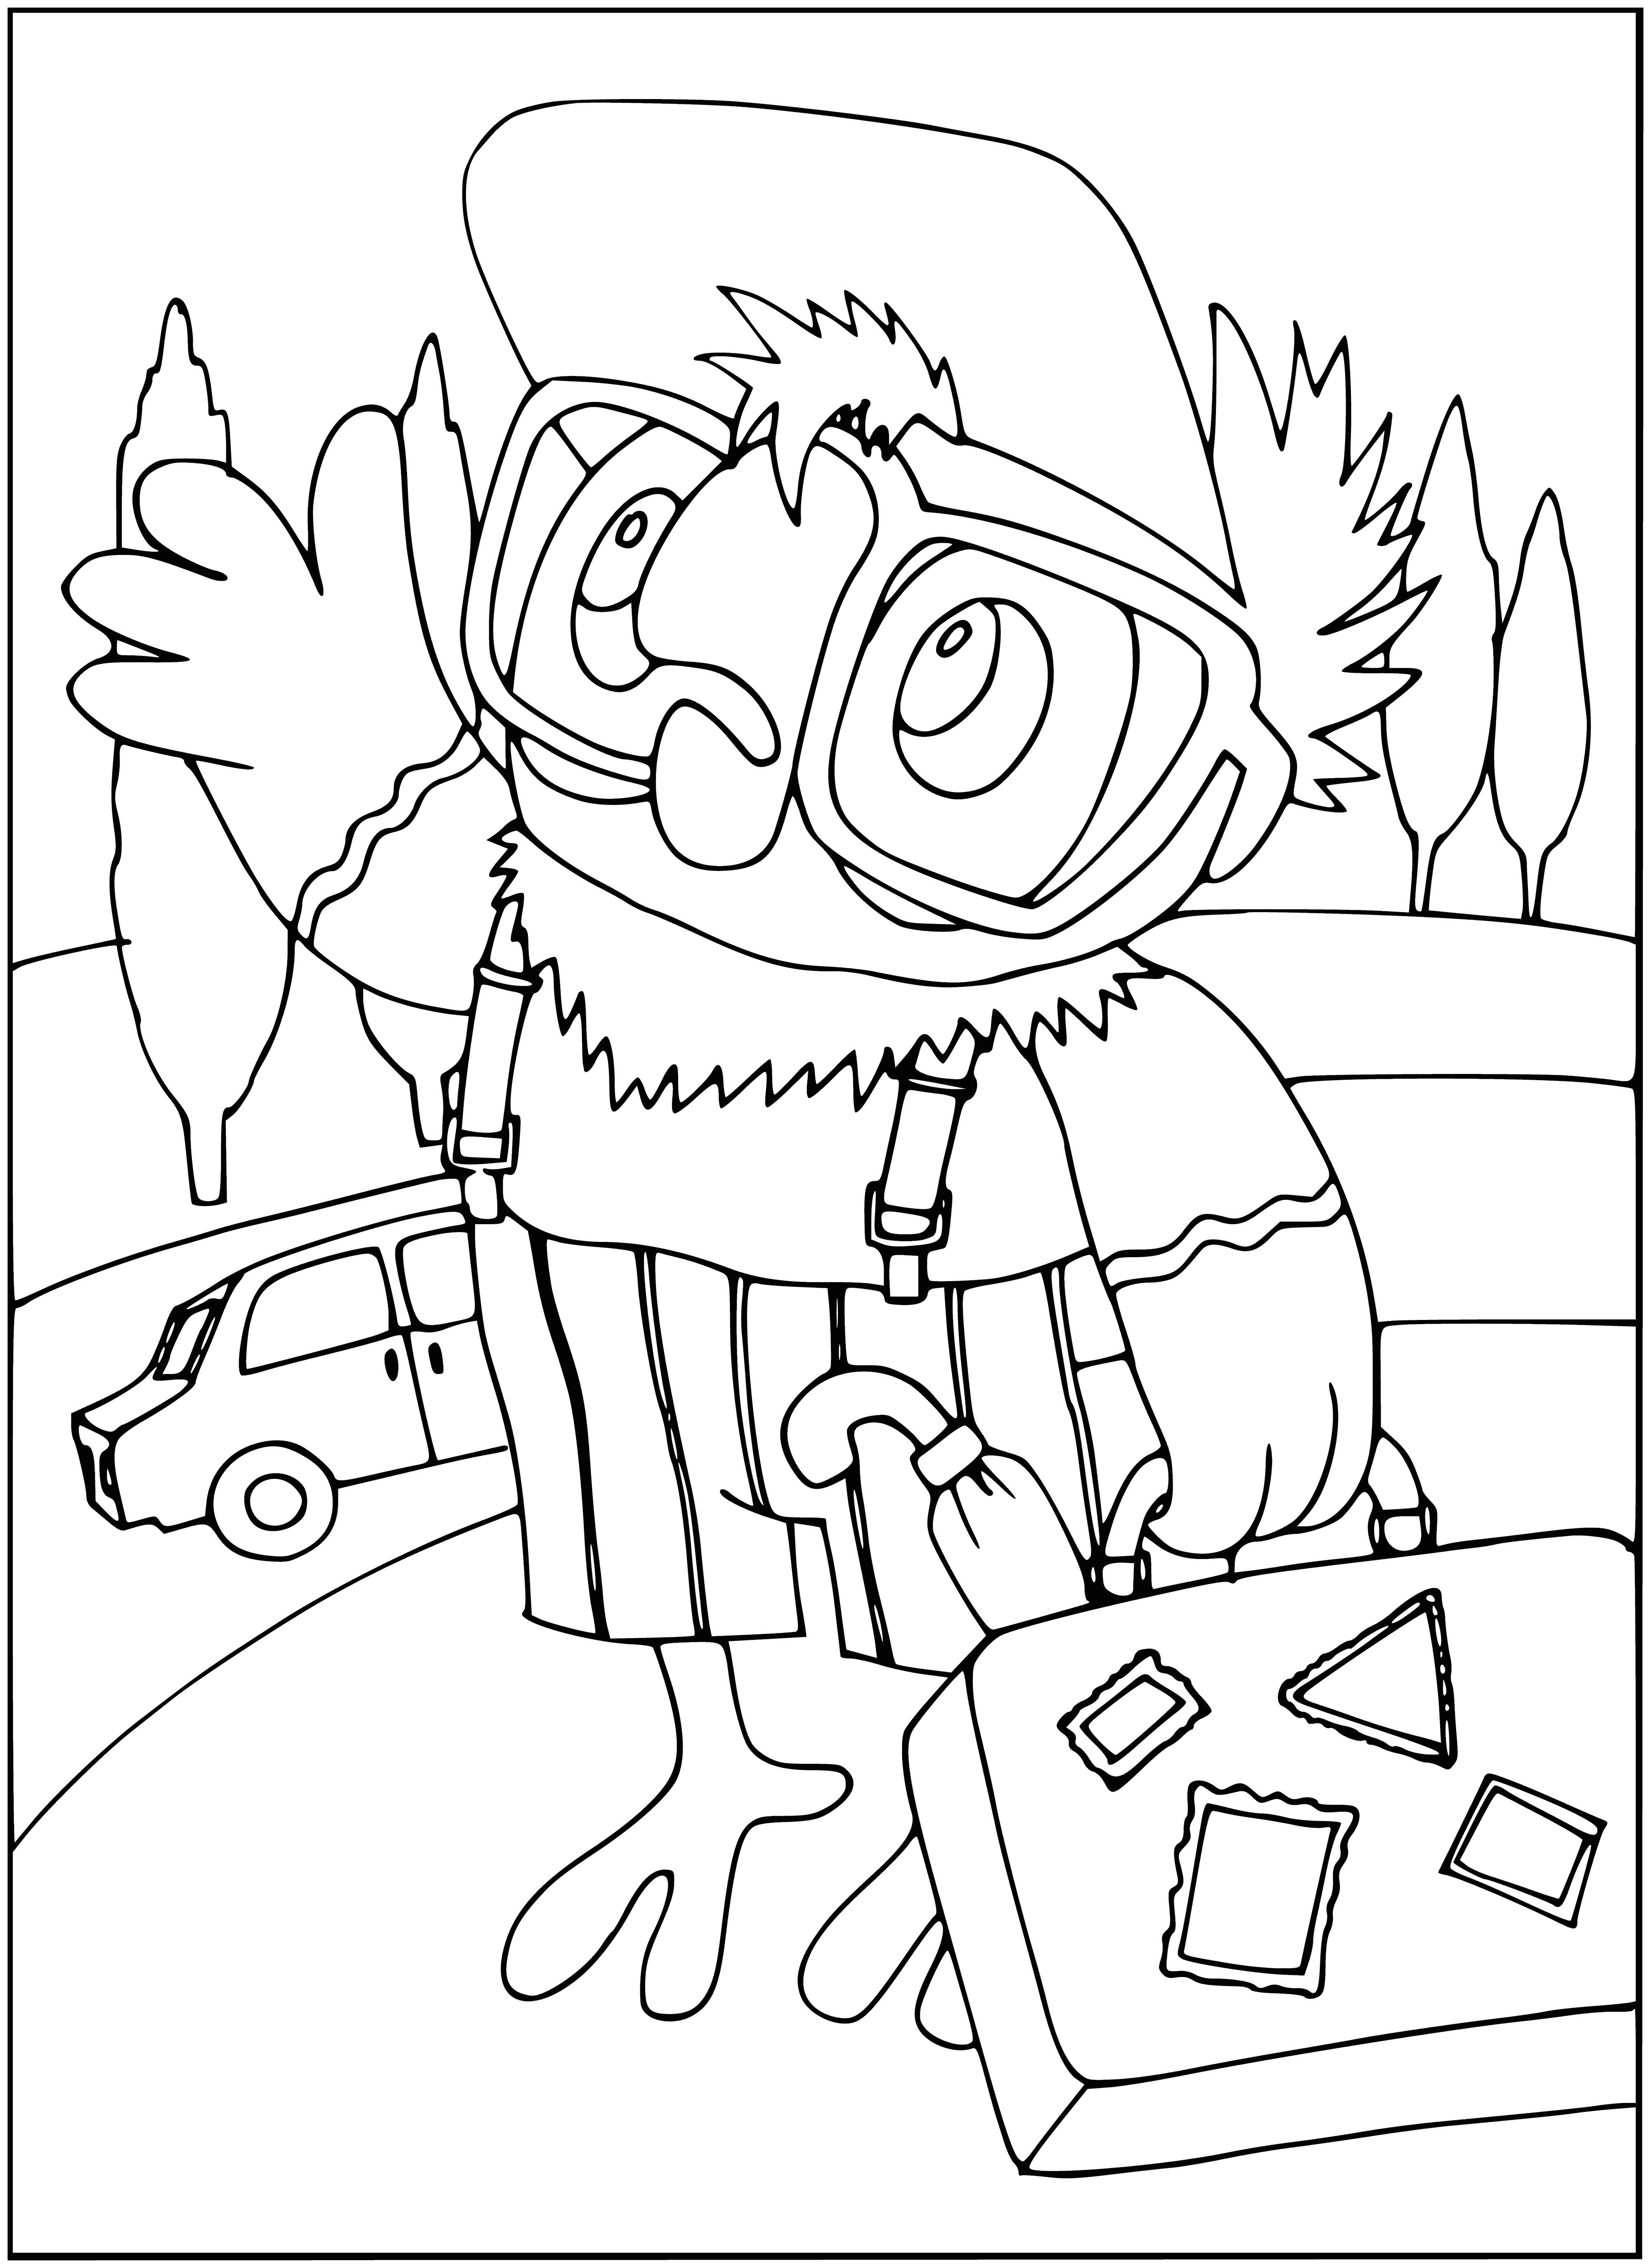 coloring page: A large bird with yellow beak, red collar, bell, sits on white perch with two green leaves in front of green background.